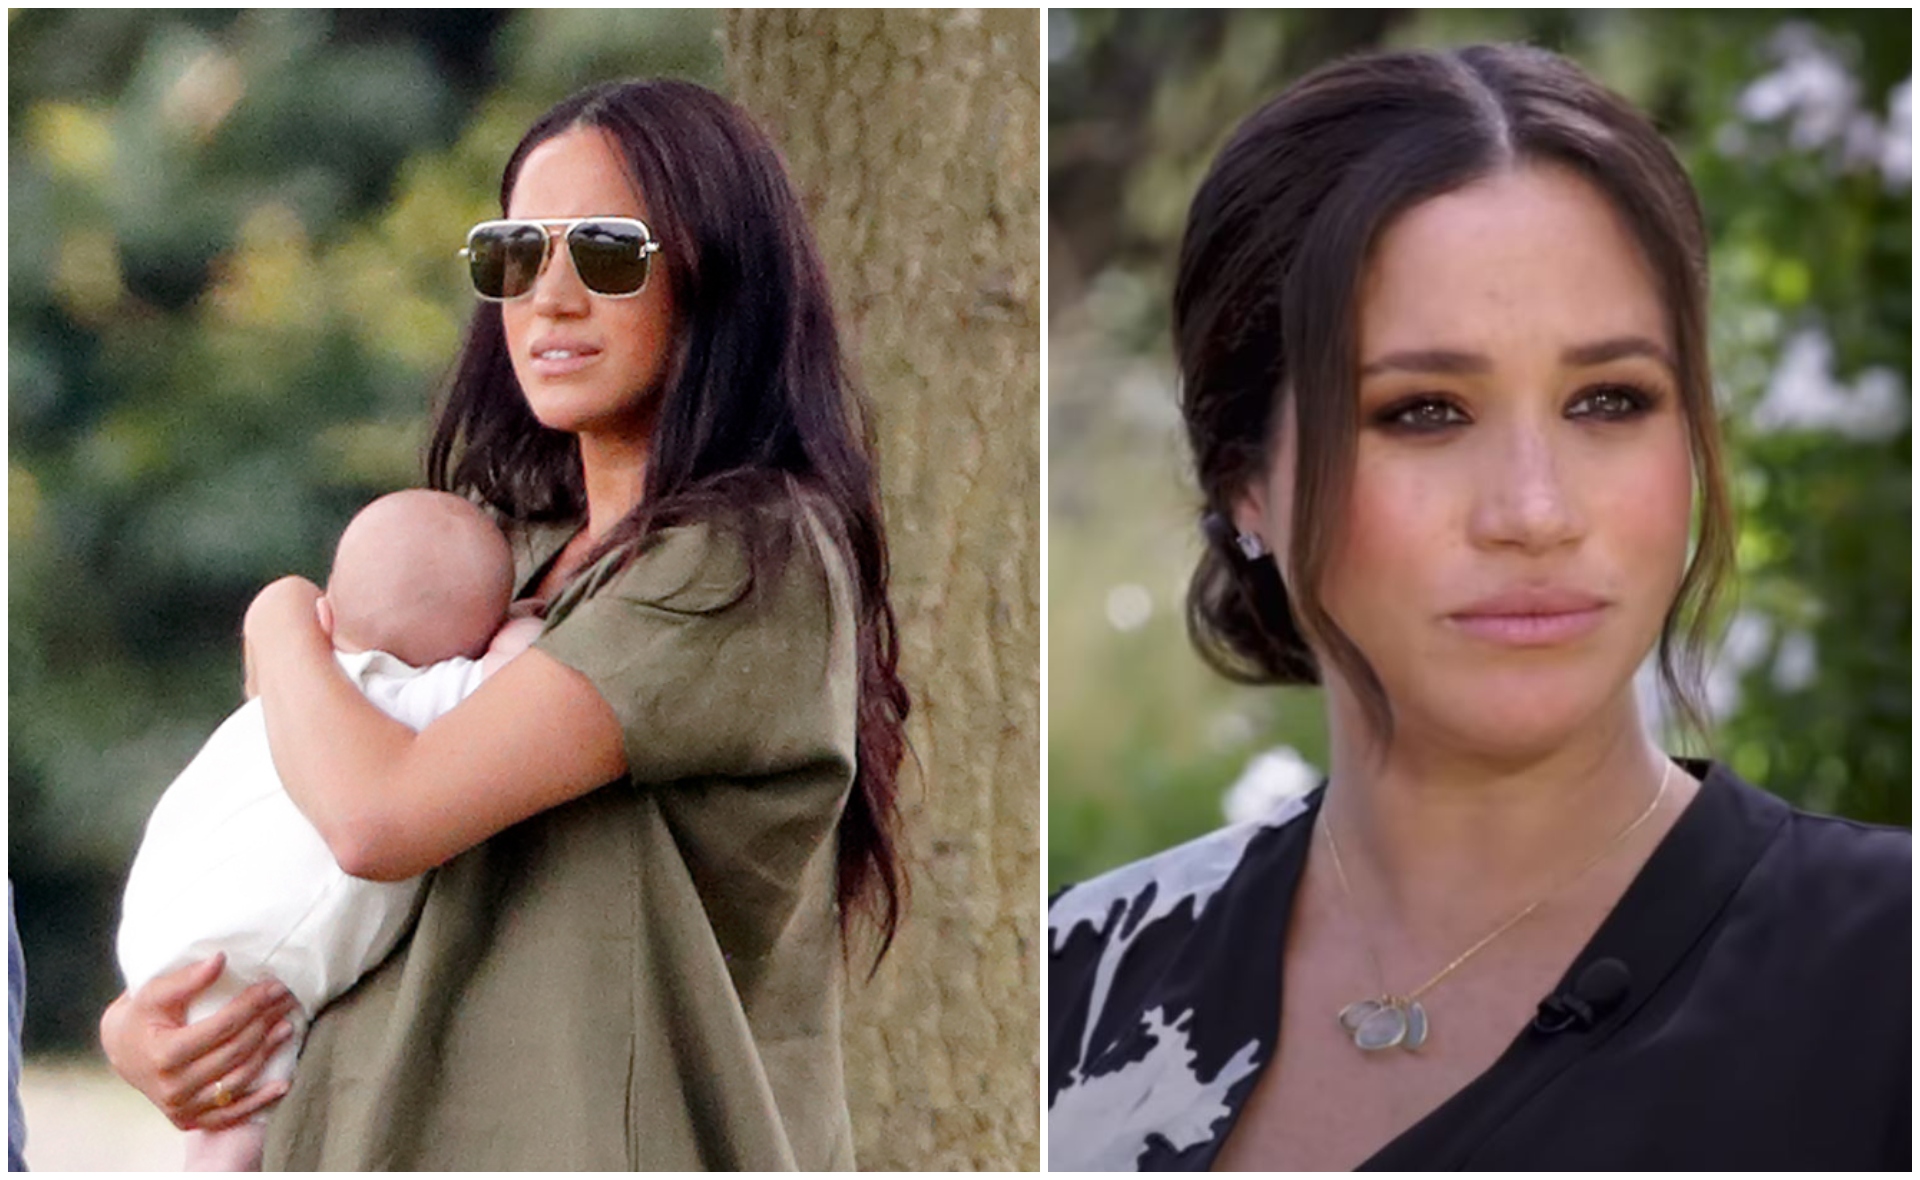 Duchess Meghan reveals deeply troubling conversations around “how dark” her unborn son Archie’s skin would be